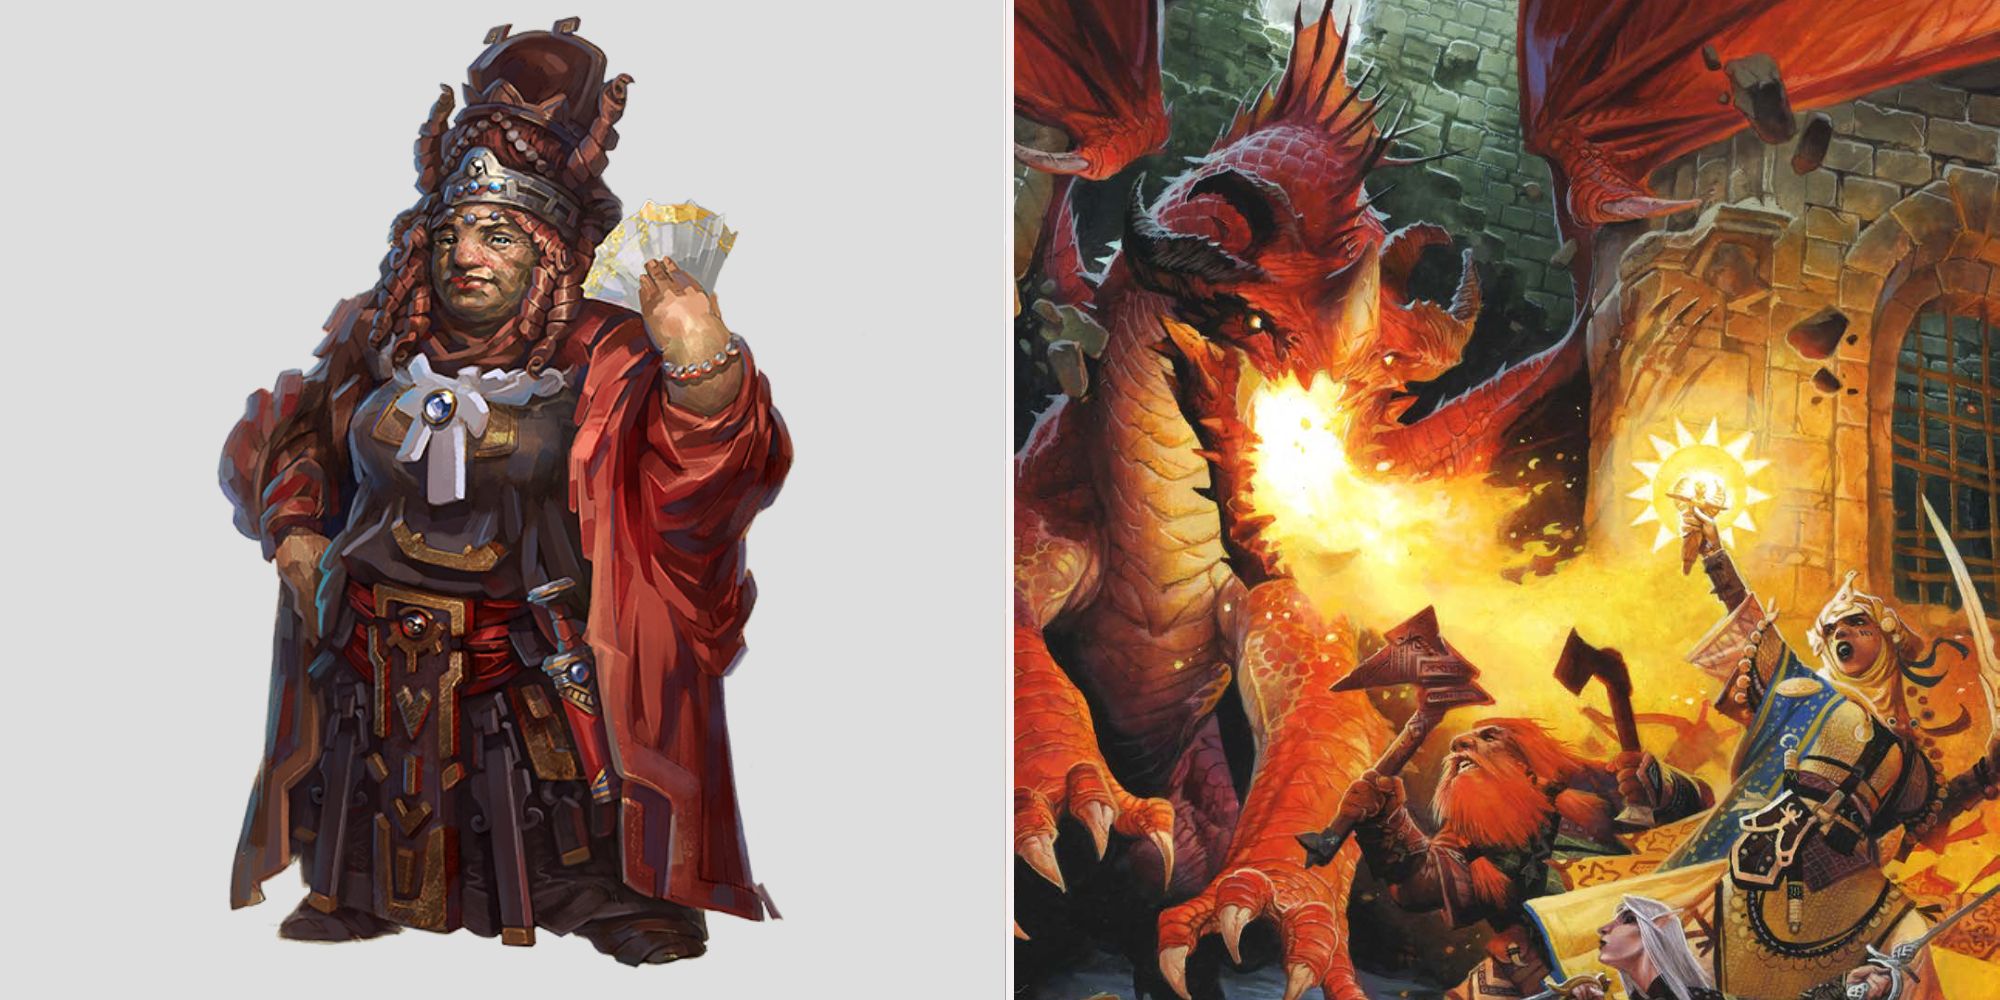 On the left a lady dwarf in robes and a crown, on the right a battle between a red dragon and a party of adventurers including a human, a dwarf, and an elf.